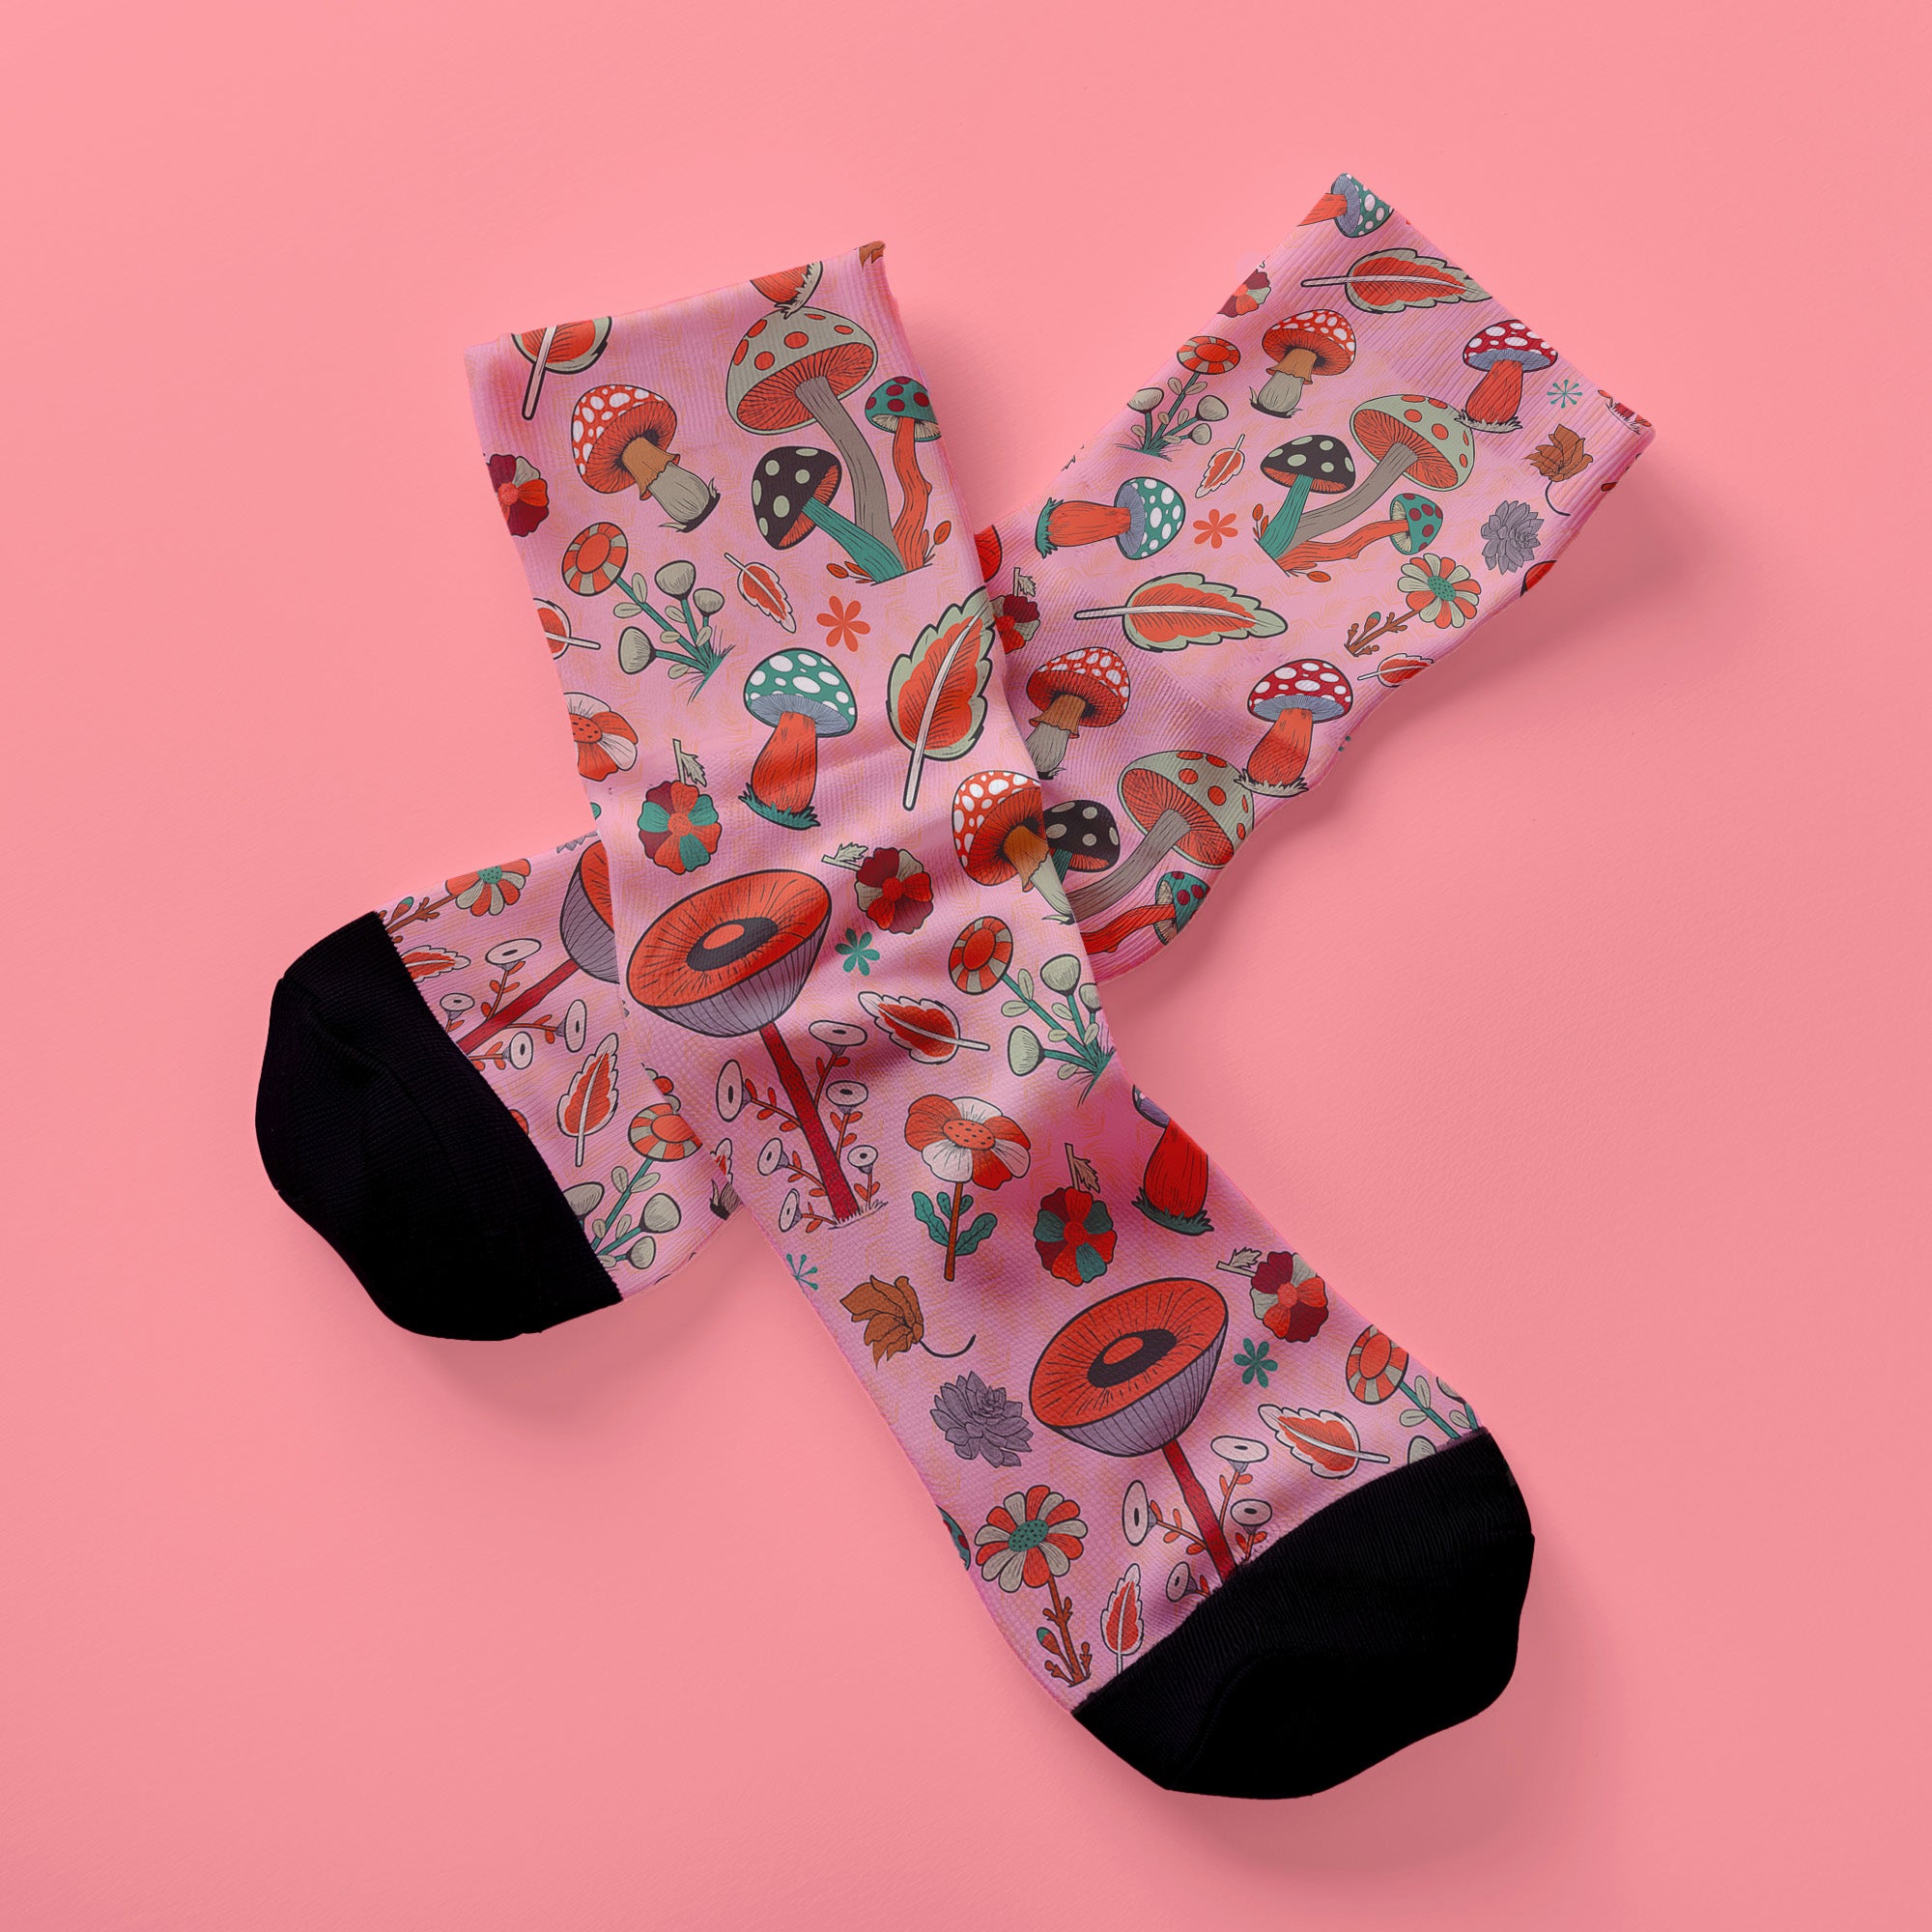 Cute mushroom-themed pink socks with various fungi and nature illustrations, black heels and toes, ideal for casual wear or gifting